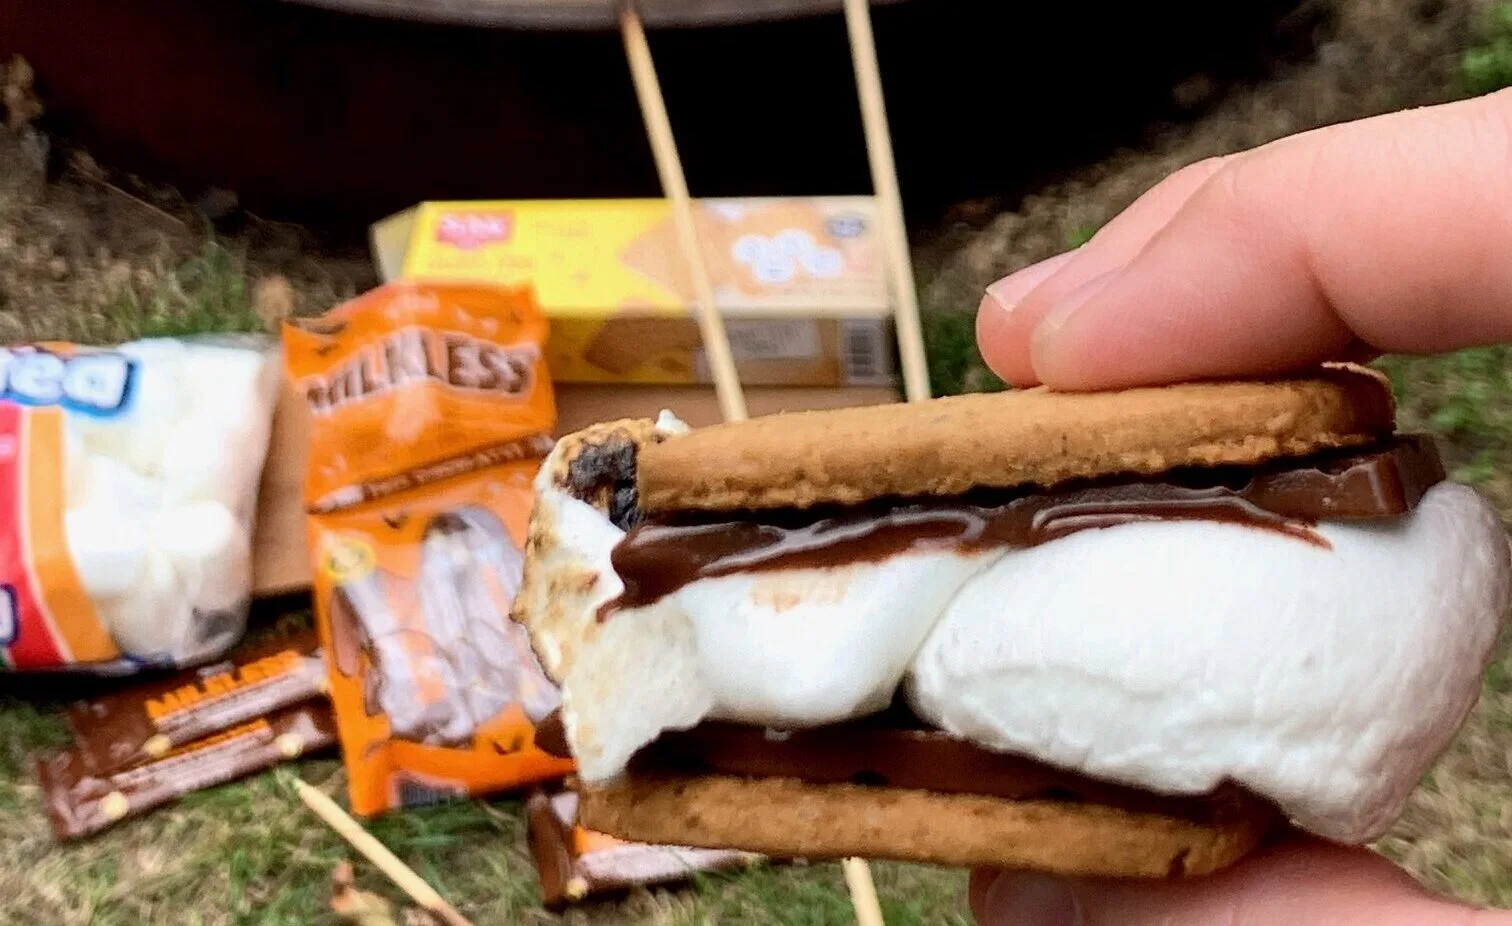 Smores by the campfire with melted chocolate